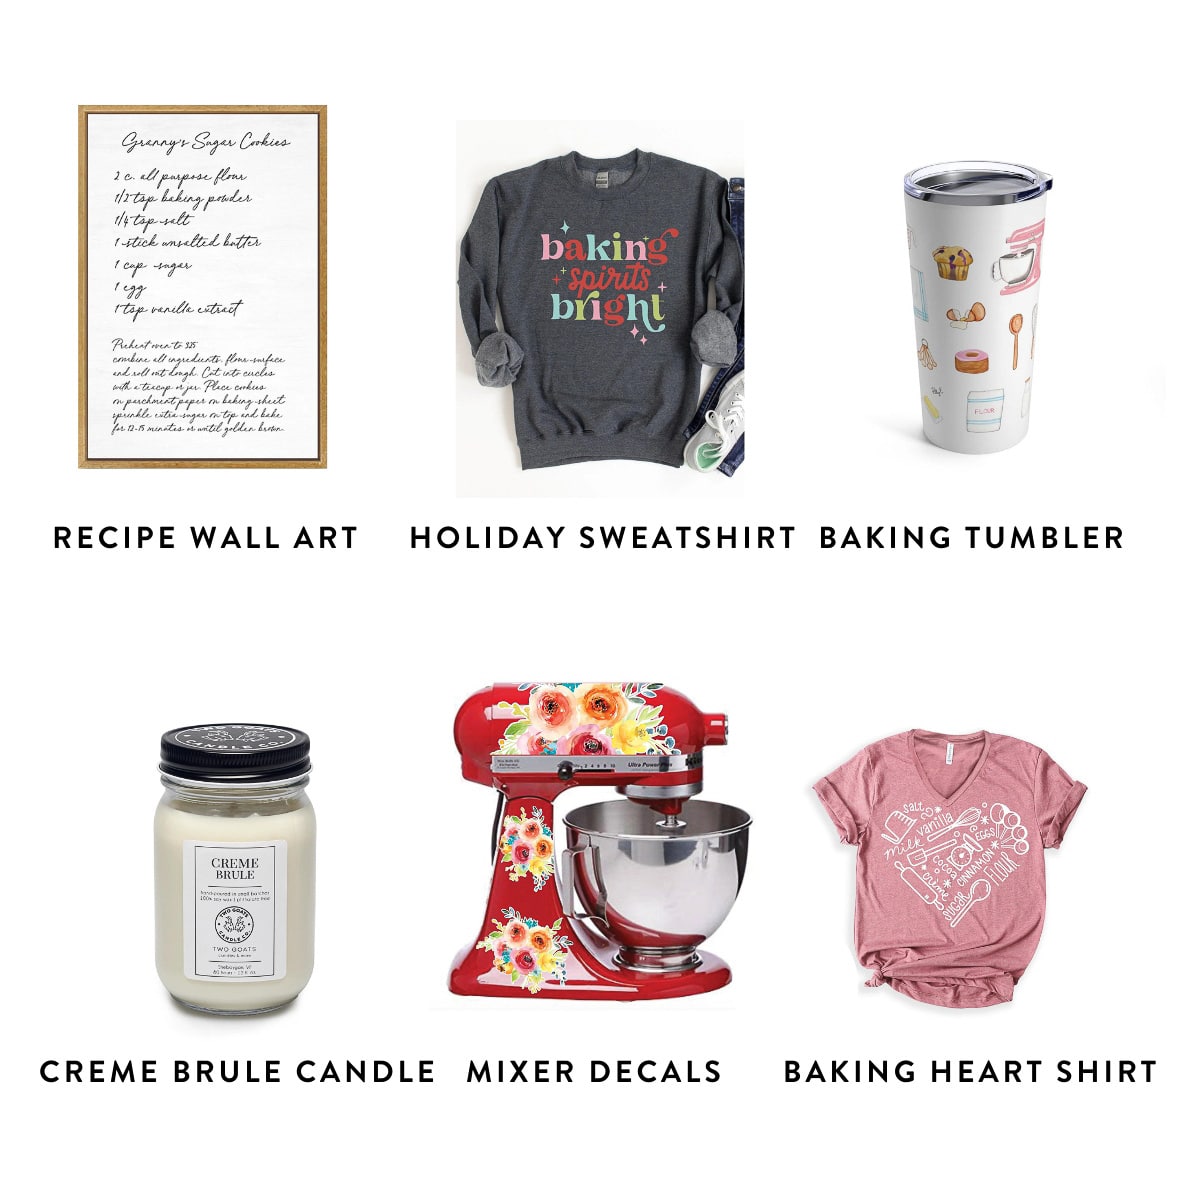 collage of graphics of different baking items including baking sweatshirt, baking heart shirt, mixer decals, baking tumbler cup, and more.